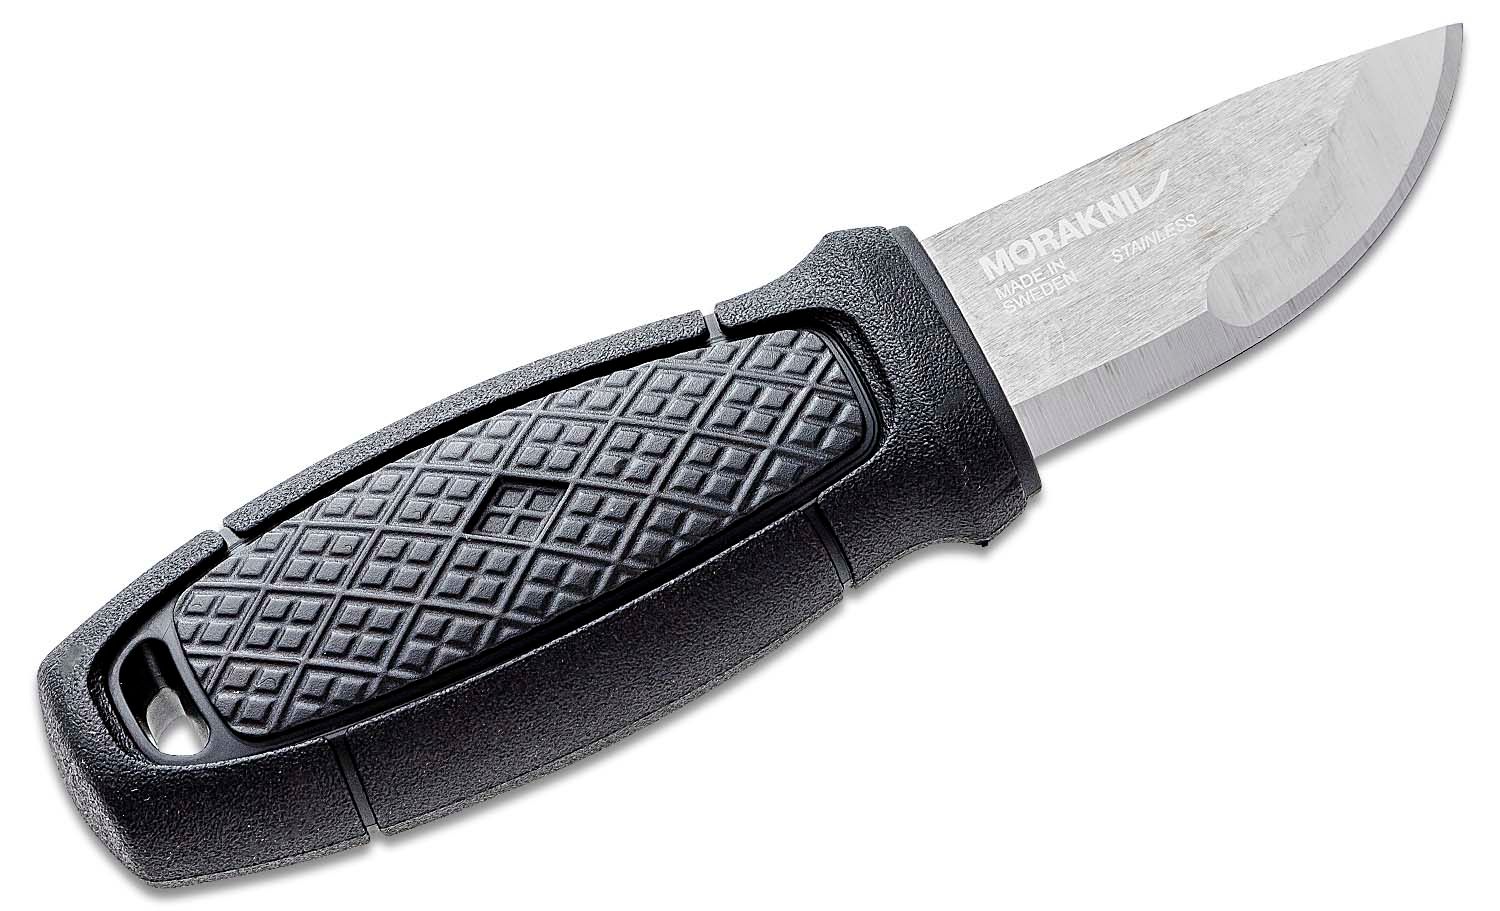  Morakniv Eldris Pocket-Size Fixed-Blade Knife With Stainless  Steel Blade and Sheath, 2.3 Inch,Black : Sports & Outdoors